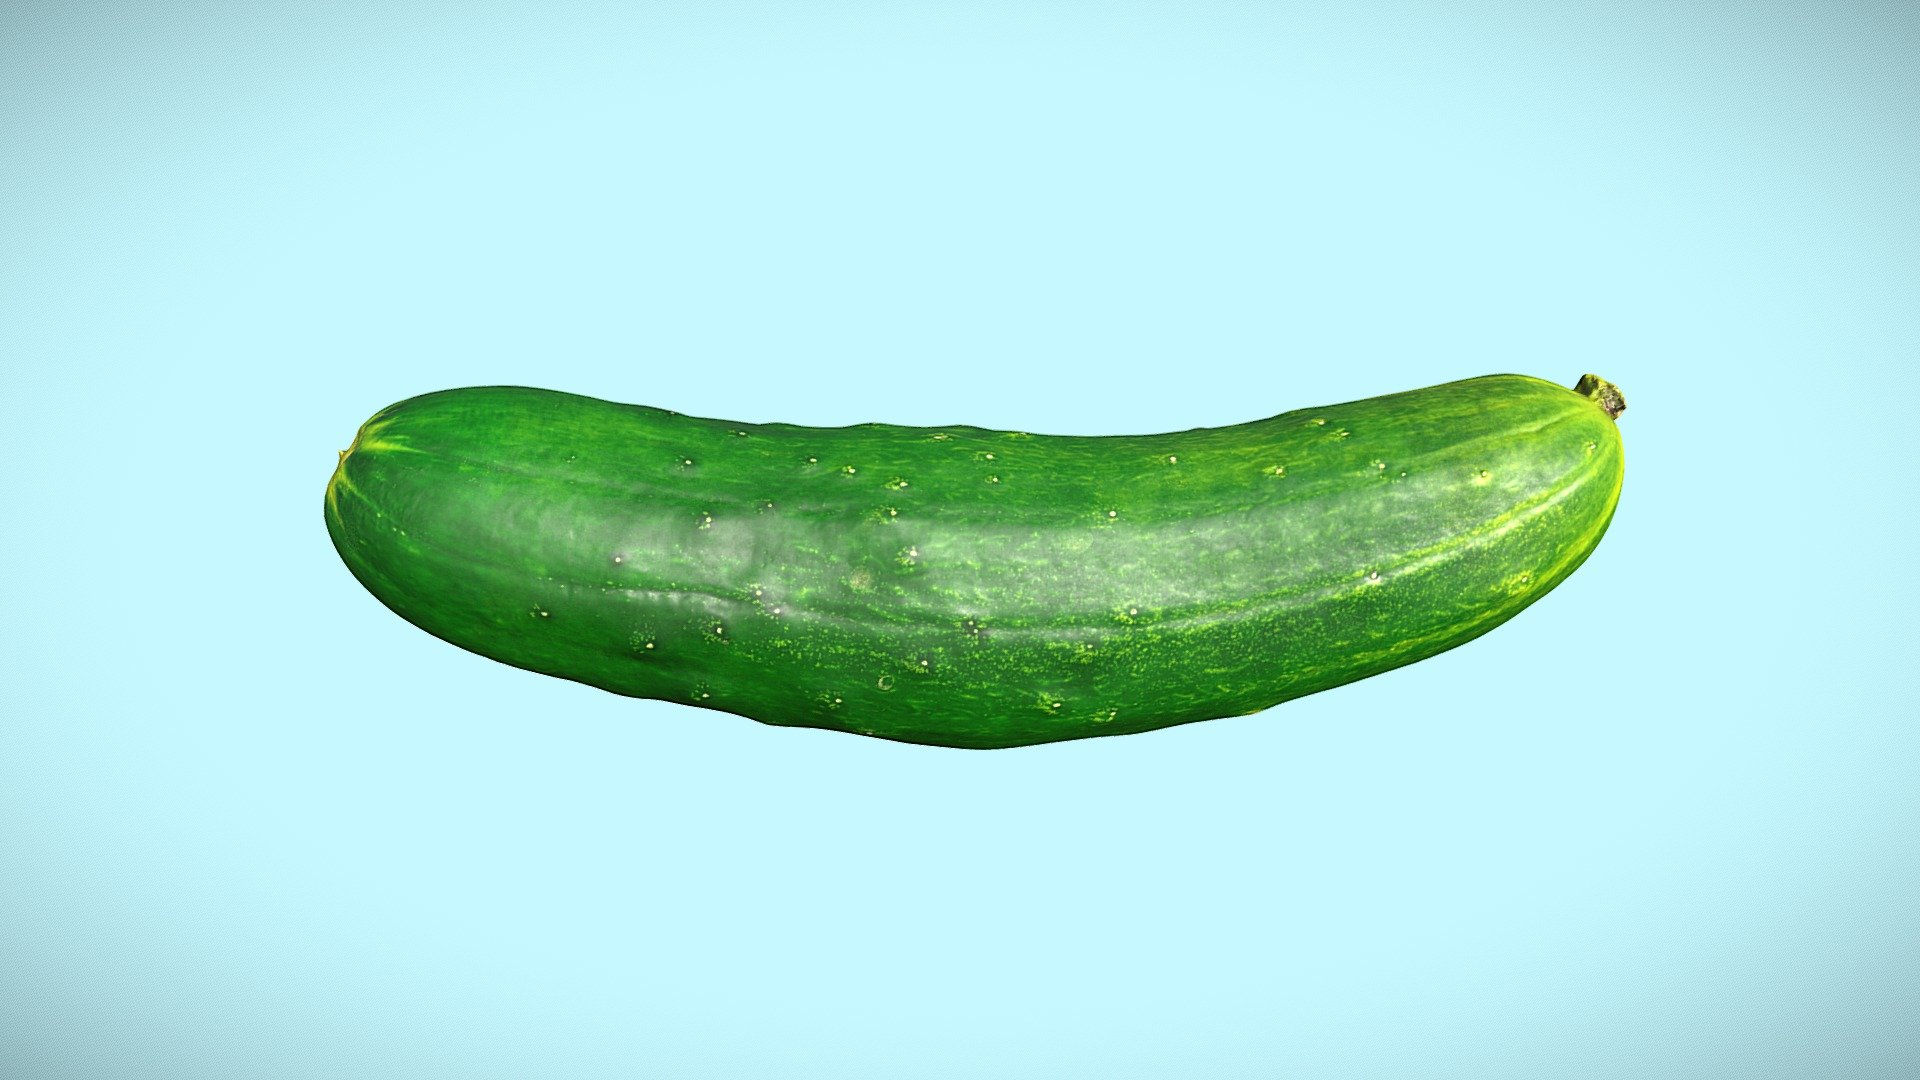 This is a cucumber, a Dasher II, specifically. It is pretty typical of cucumbers. It is suitable for salads and pickling, or eating plain 3d model